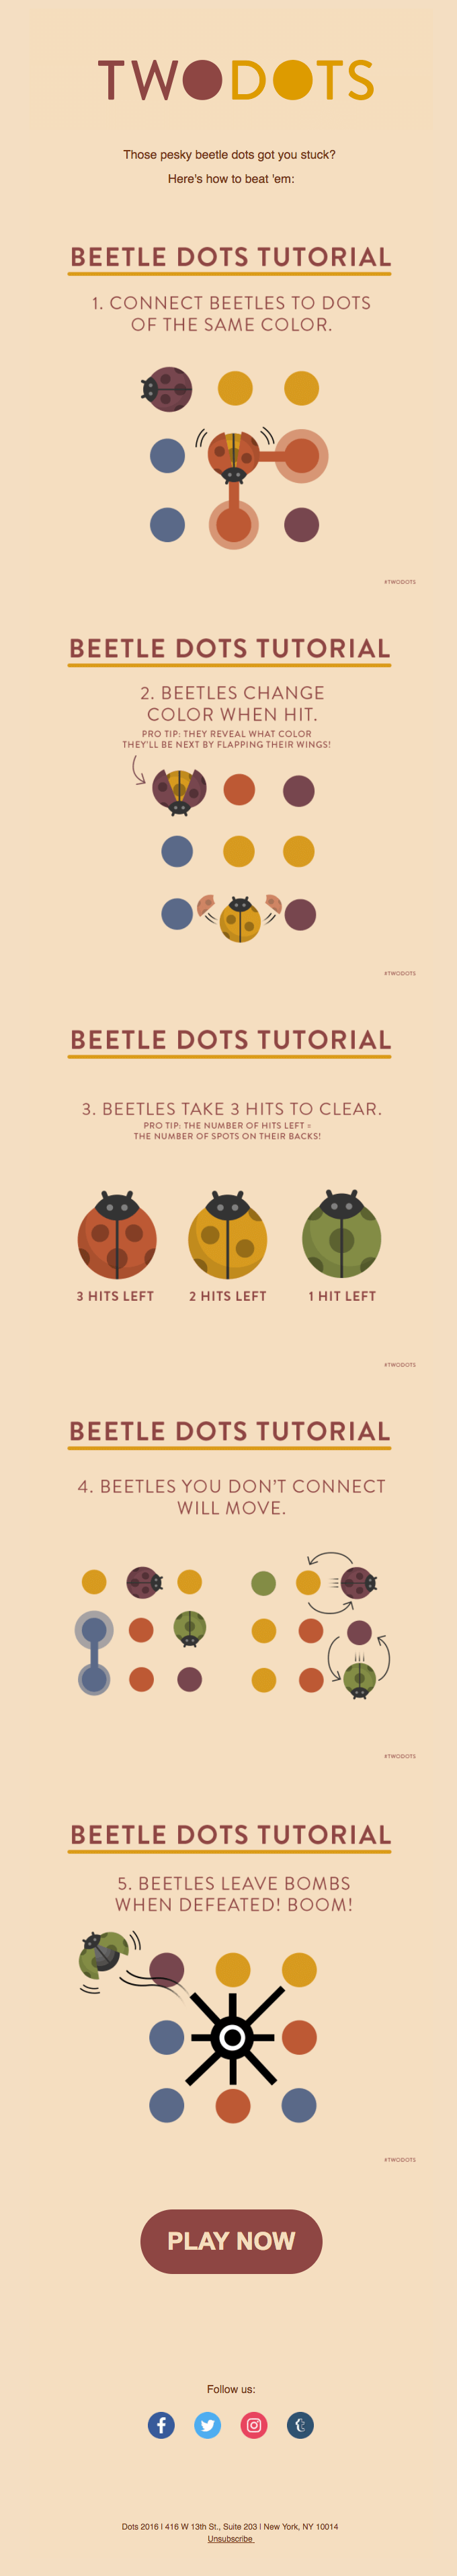 Tutorial email from Two Dots that shows how to play Beetle Dots, the copy is brief and well-illustrated for better clarity.